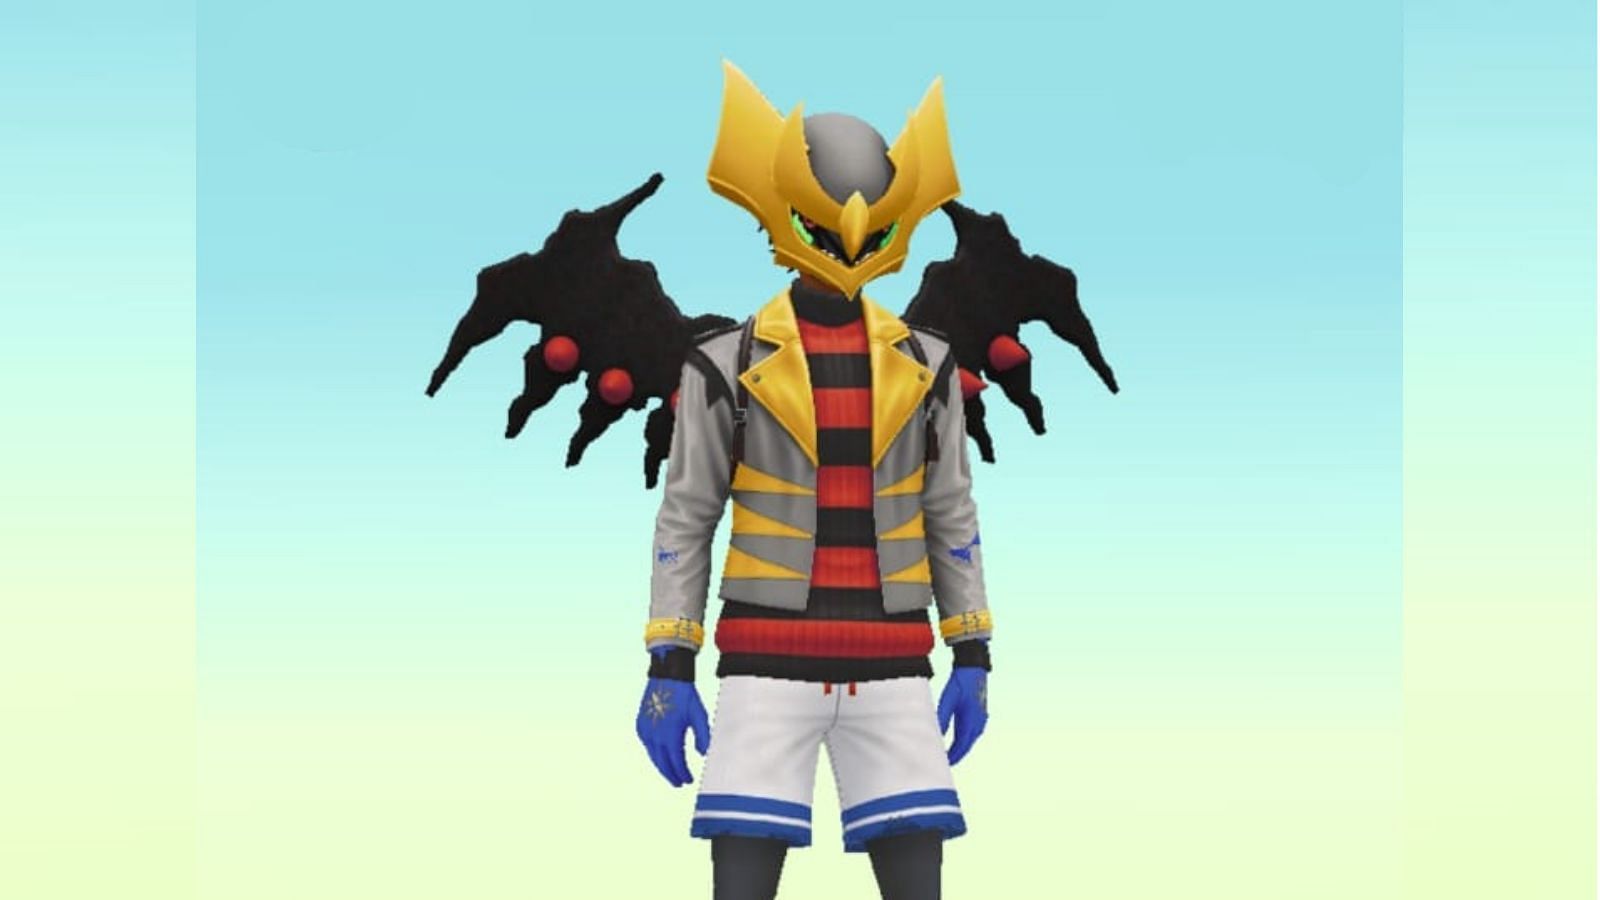 Preview of Giratina Helmet, Wings, and Jacket in Pokemon GO (Image via Niantic)